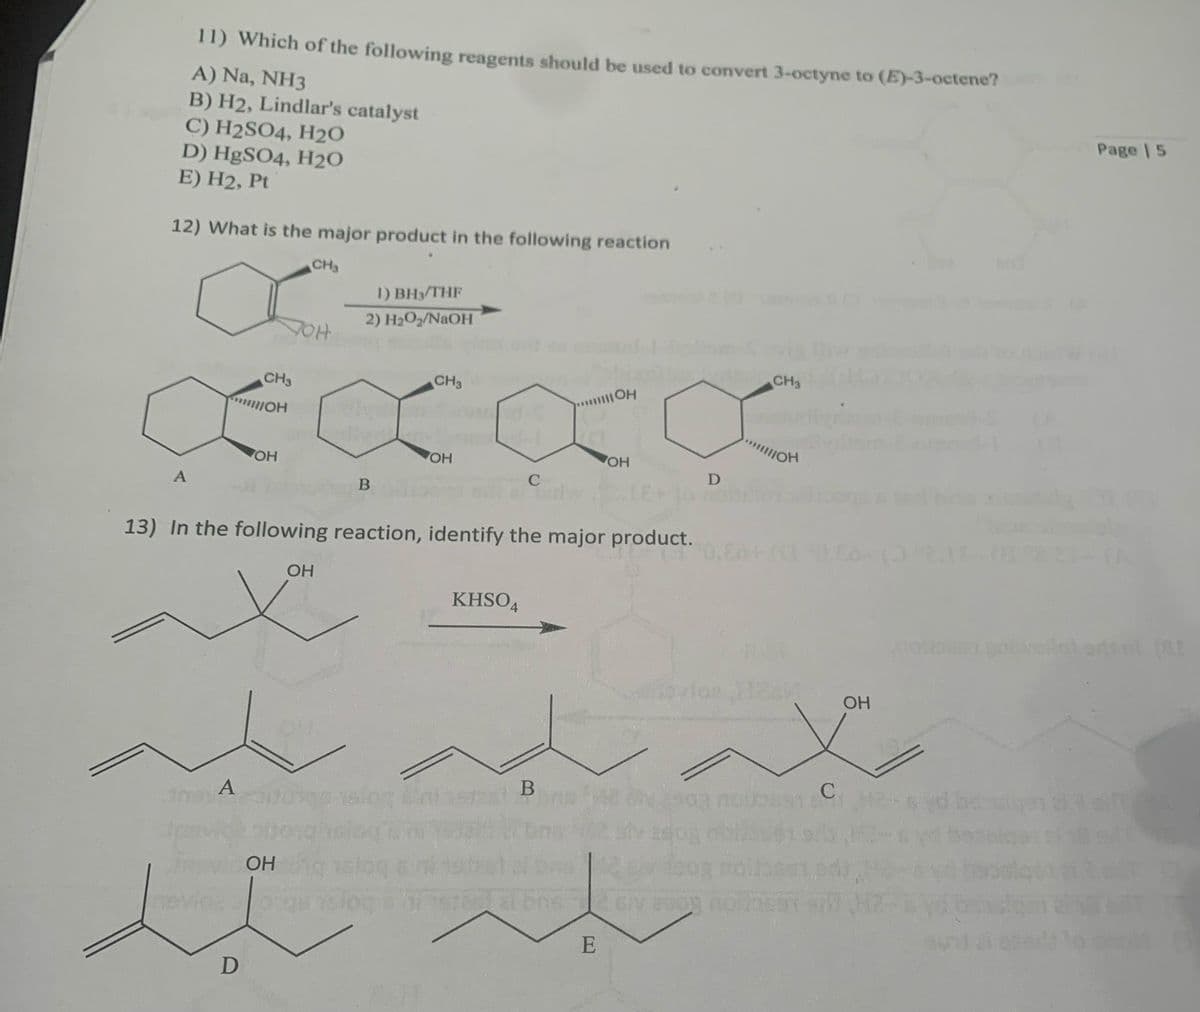 11) Which of the following reagents should be used to convert 3-octyne to (E)-3-octene?
A) Na, NH3
B) H2, Lindlar's catalyst
C) H2SO4, H20
D) HgSO4, H20
E) H2, Pt
Page | 5
12) What is the major product in the following reaction
CH3
1) BH3/THF
2) H2O2/NAOH
HOL
CH3
CH3
CH3
HOll
OH
VOH
HO
A
C
B
13) In the following reaction, identify the major product.
0.00 (00.00 0
OH
KHSO,
rlos
OH
A
419/3.12-6
OH
etads
E
